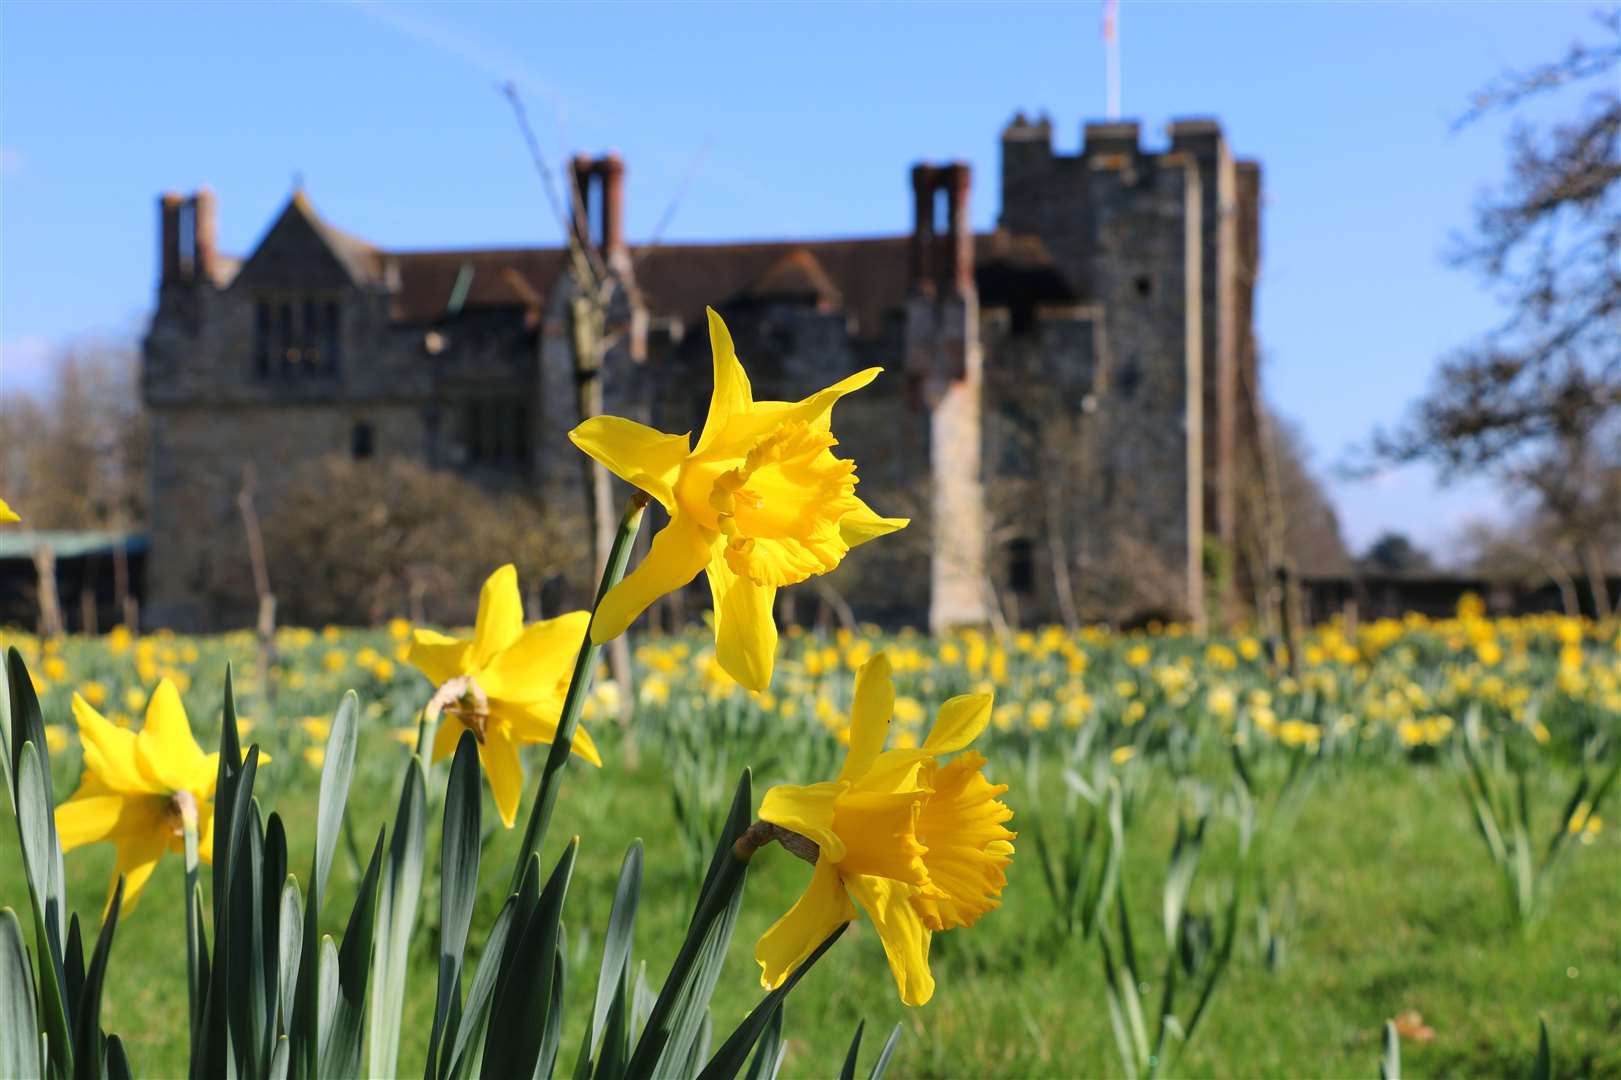 Daffodils will be in bloom in late March at Hever Castle Picture: Vikki Rimmer